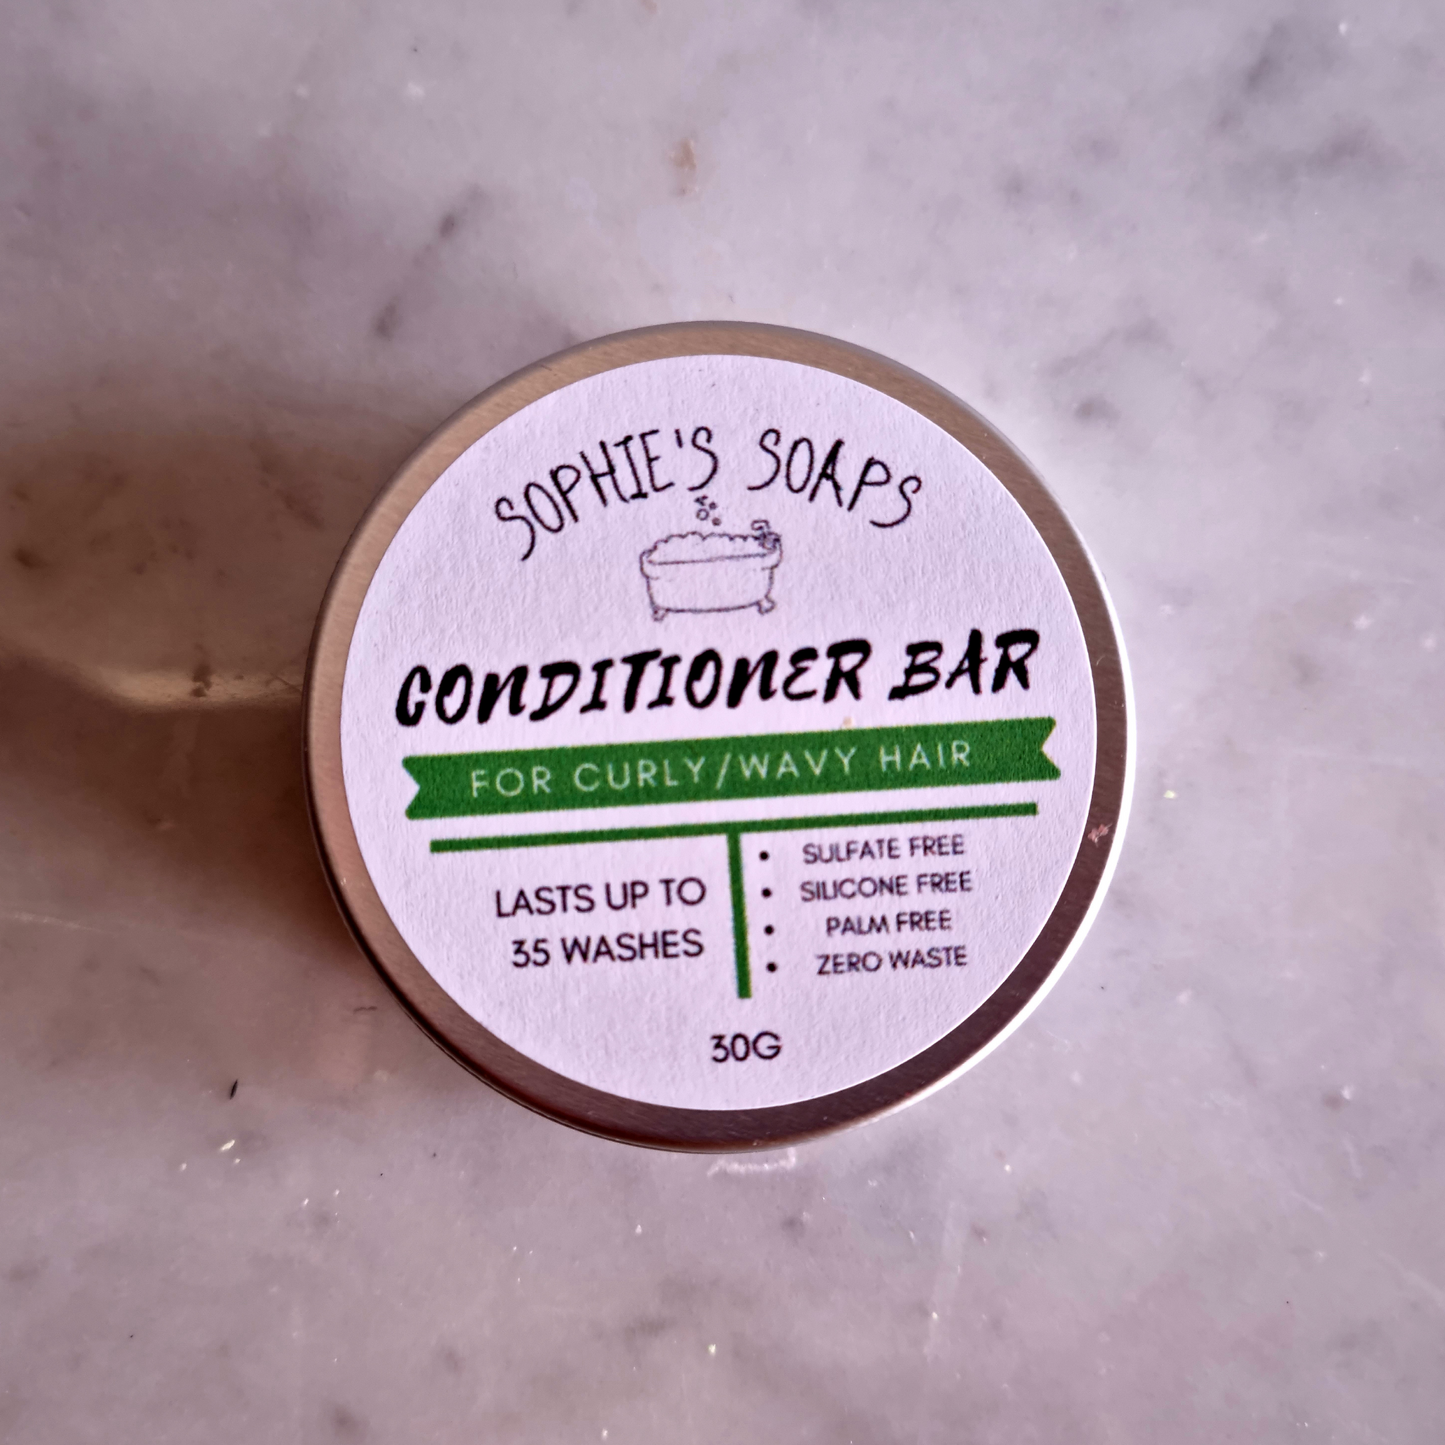 Curly/Wavy Hair Conditioner Bar - Sophie's Soaps